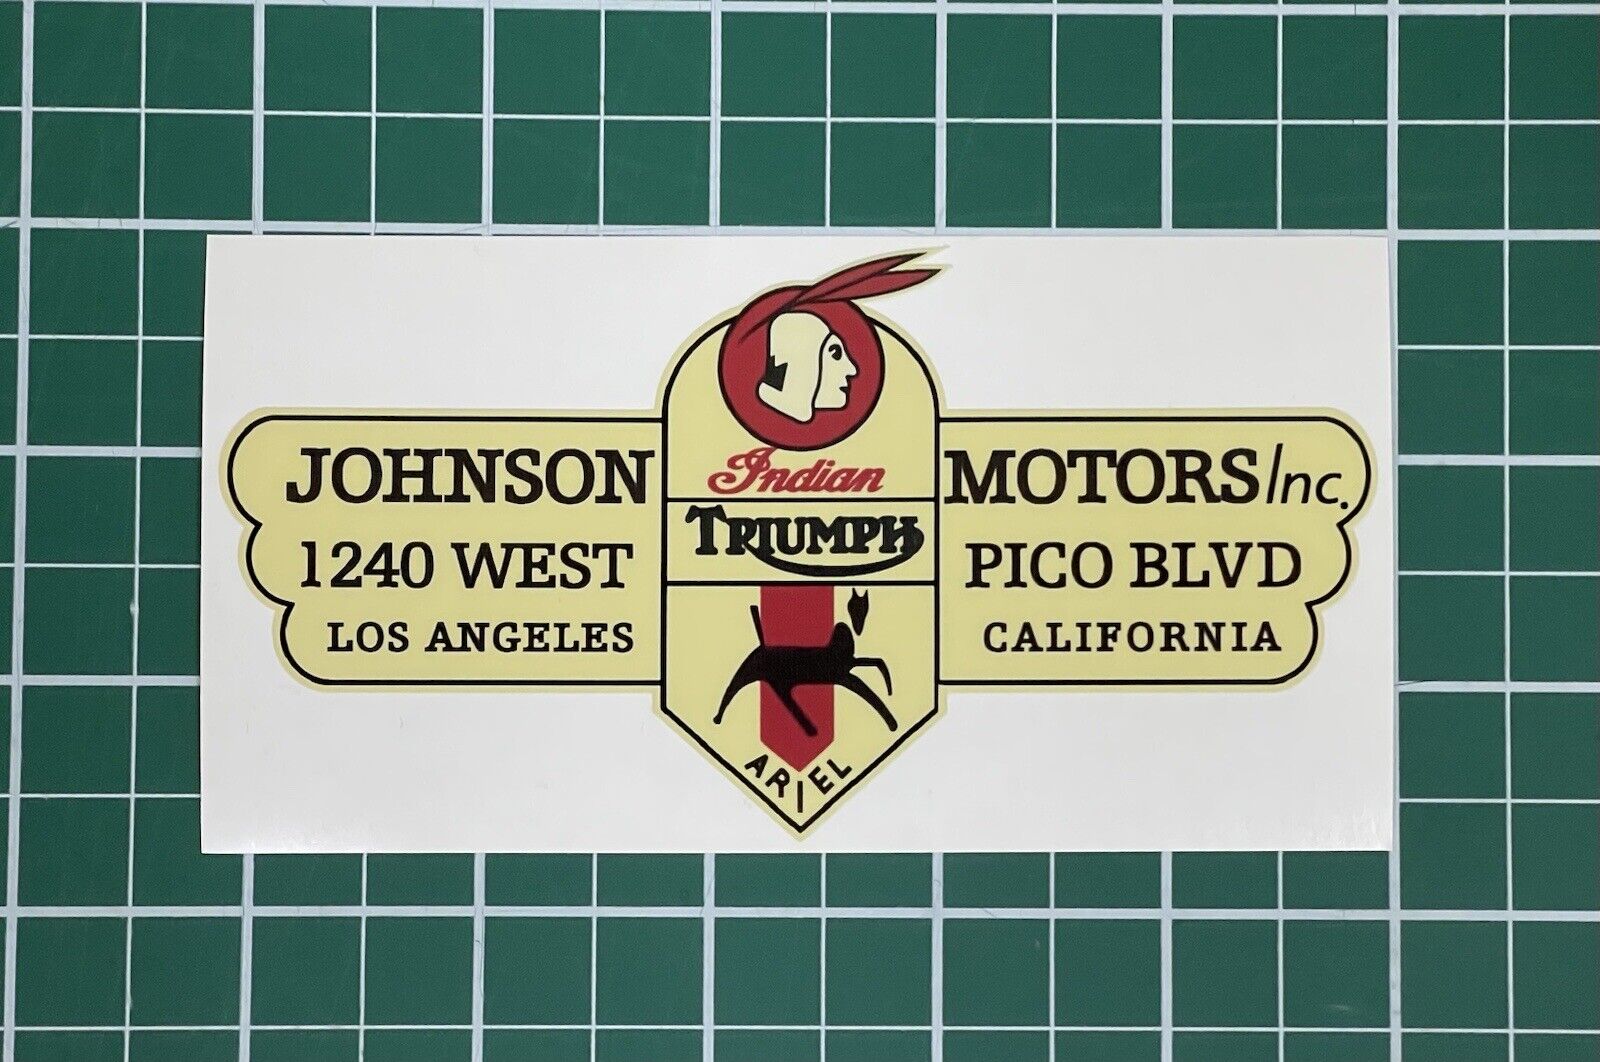 Large Johnson Motors New Decal Sticker Vintage Motorcycle Triumph Indian